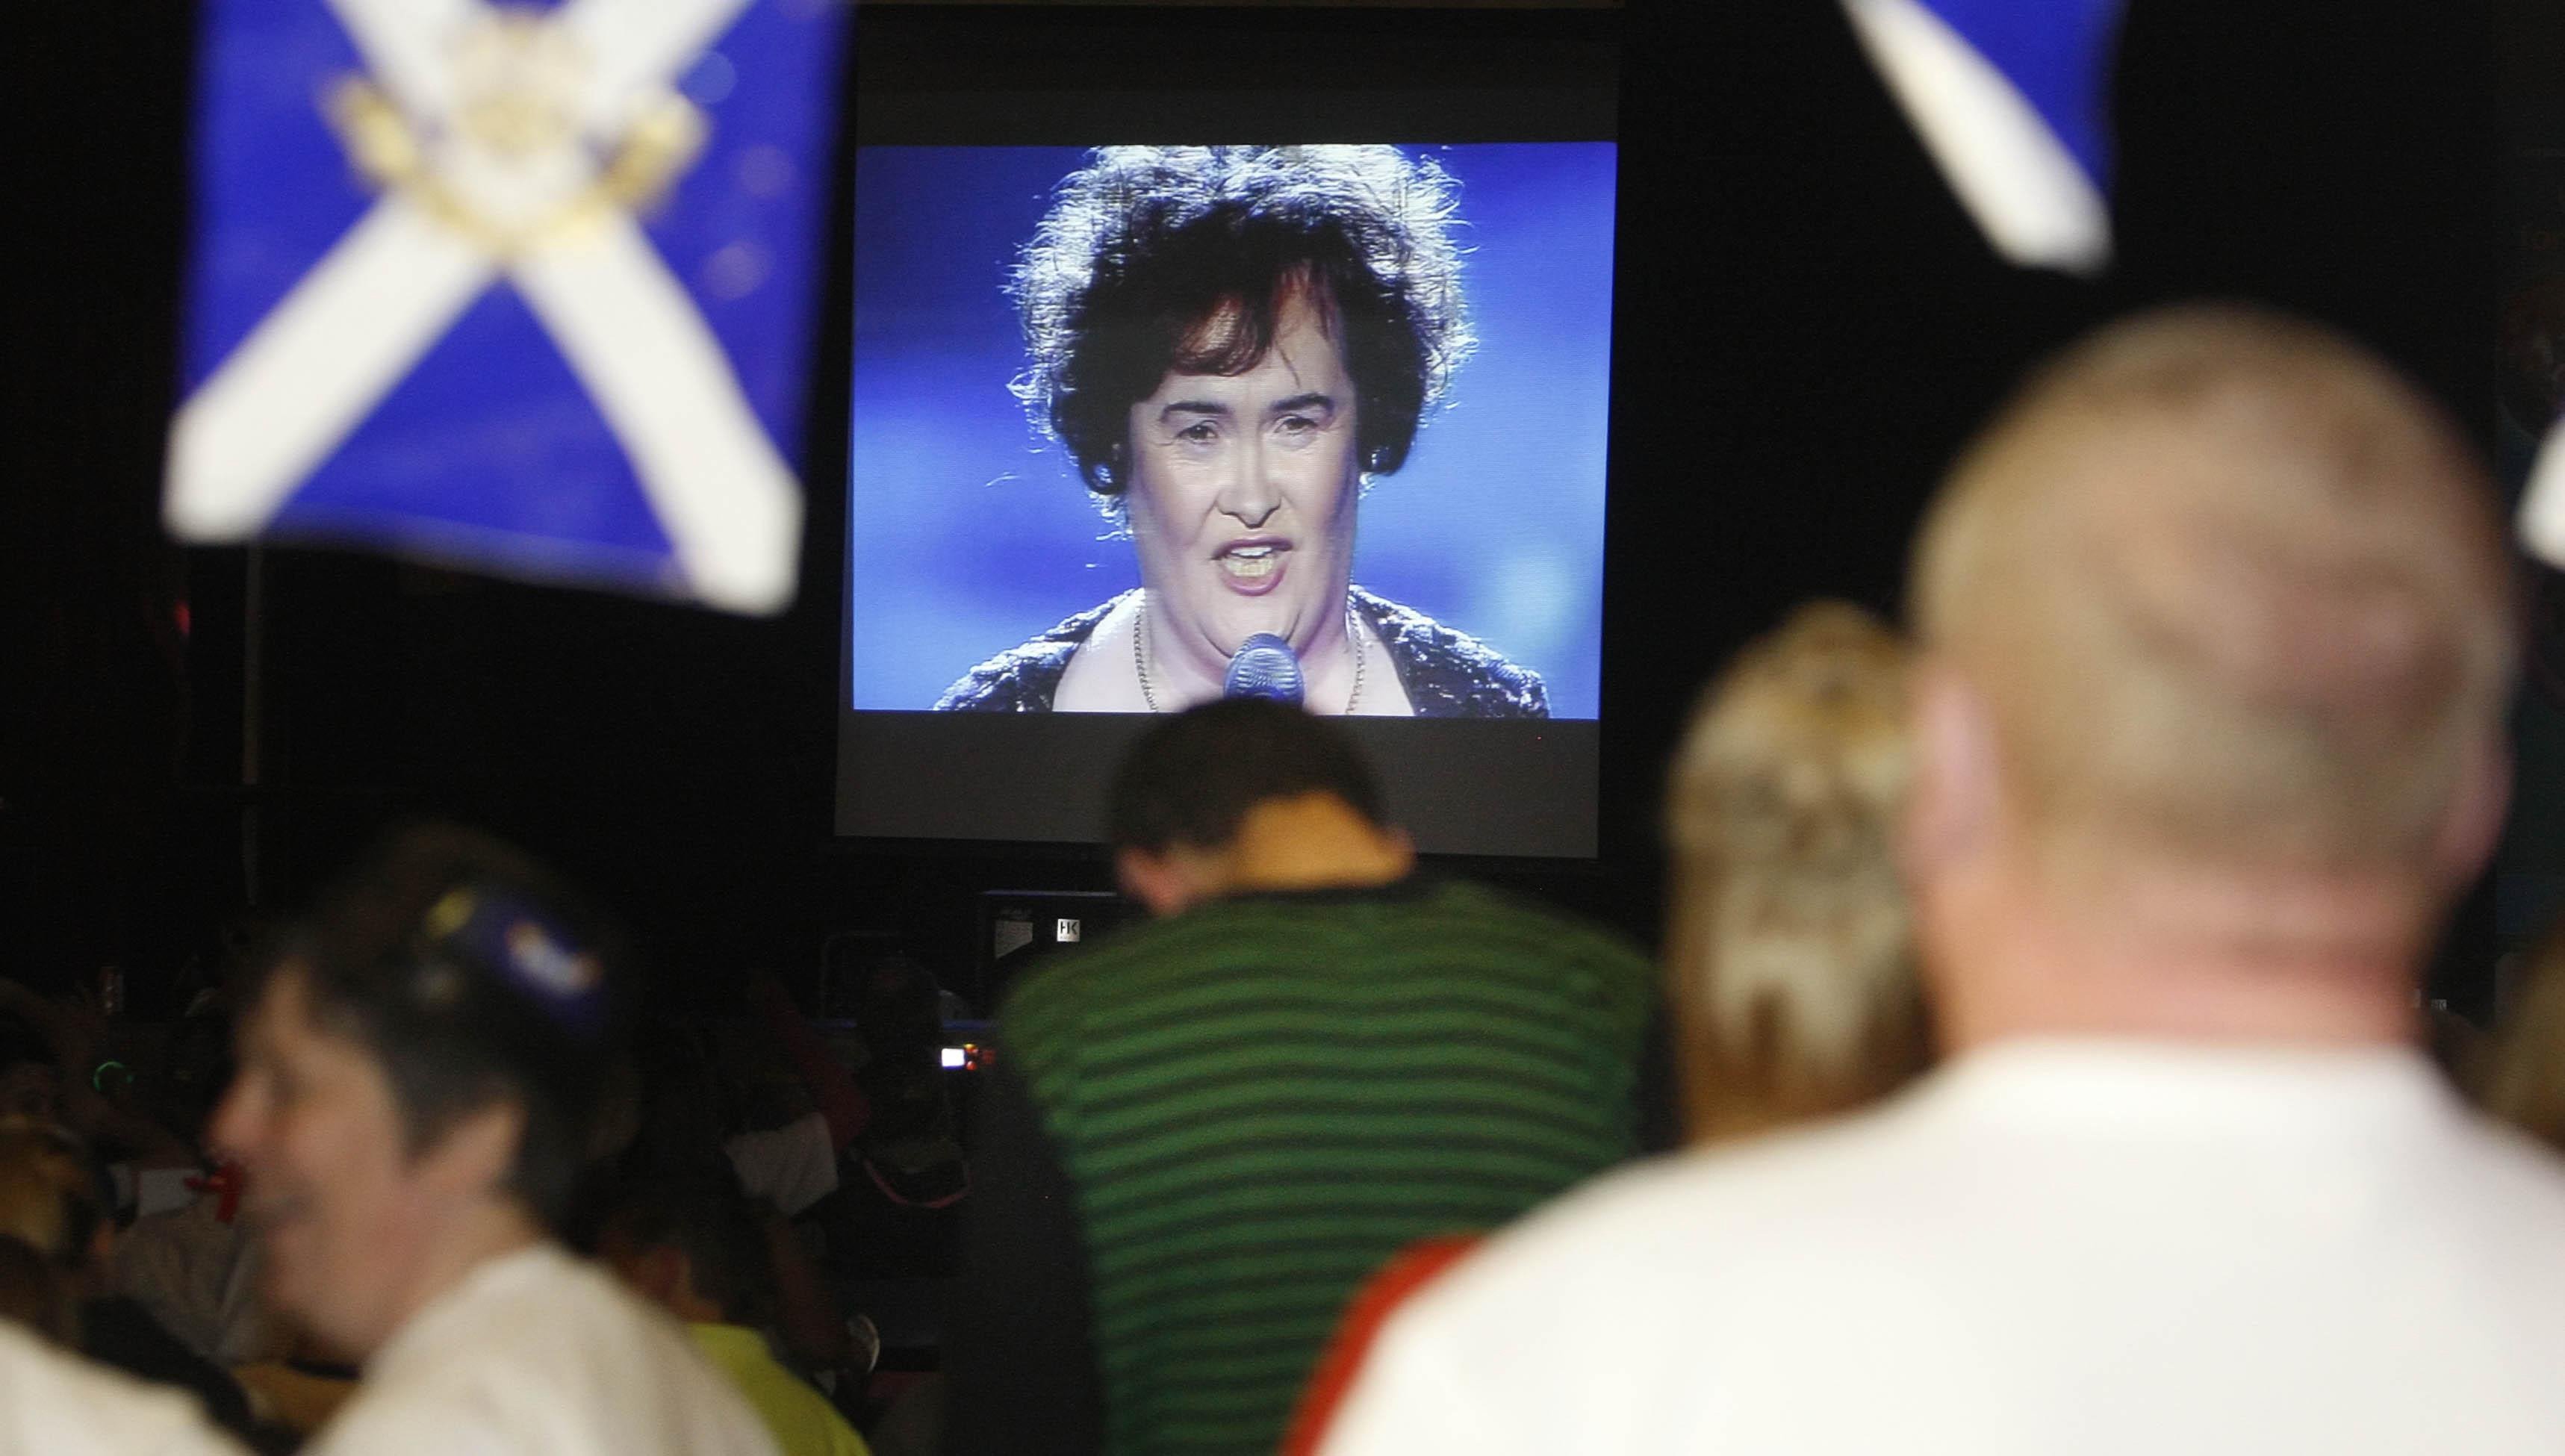 Fans gather to watch Susan Boyle perform in the Britain's Got Talent live semi-final on a large screen in the community center in her home town of Blackburn, West Lothian. | Source: Getty Images